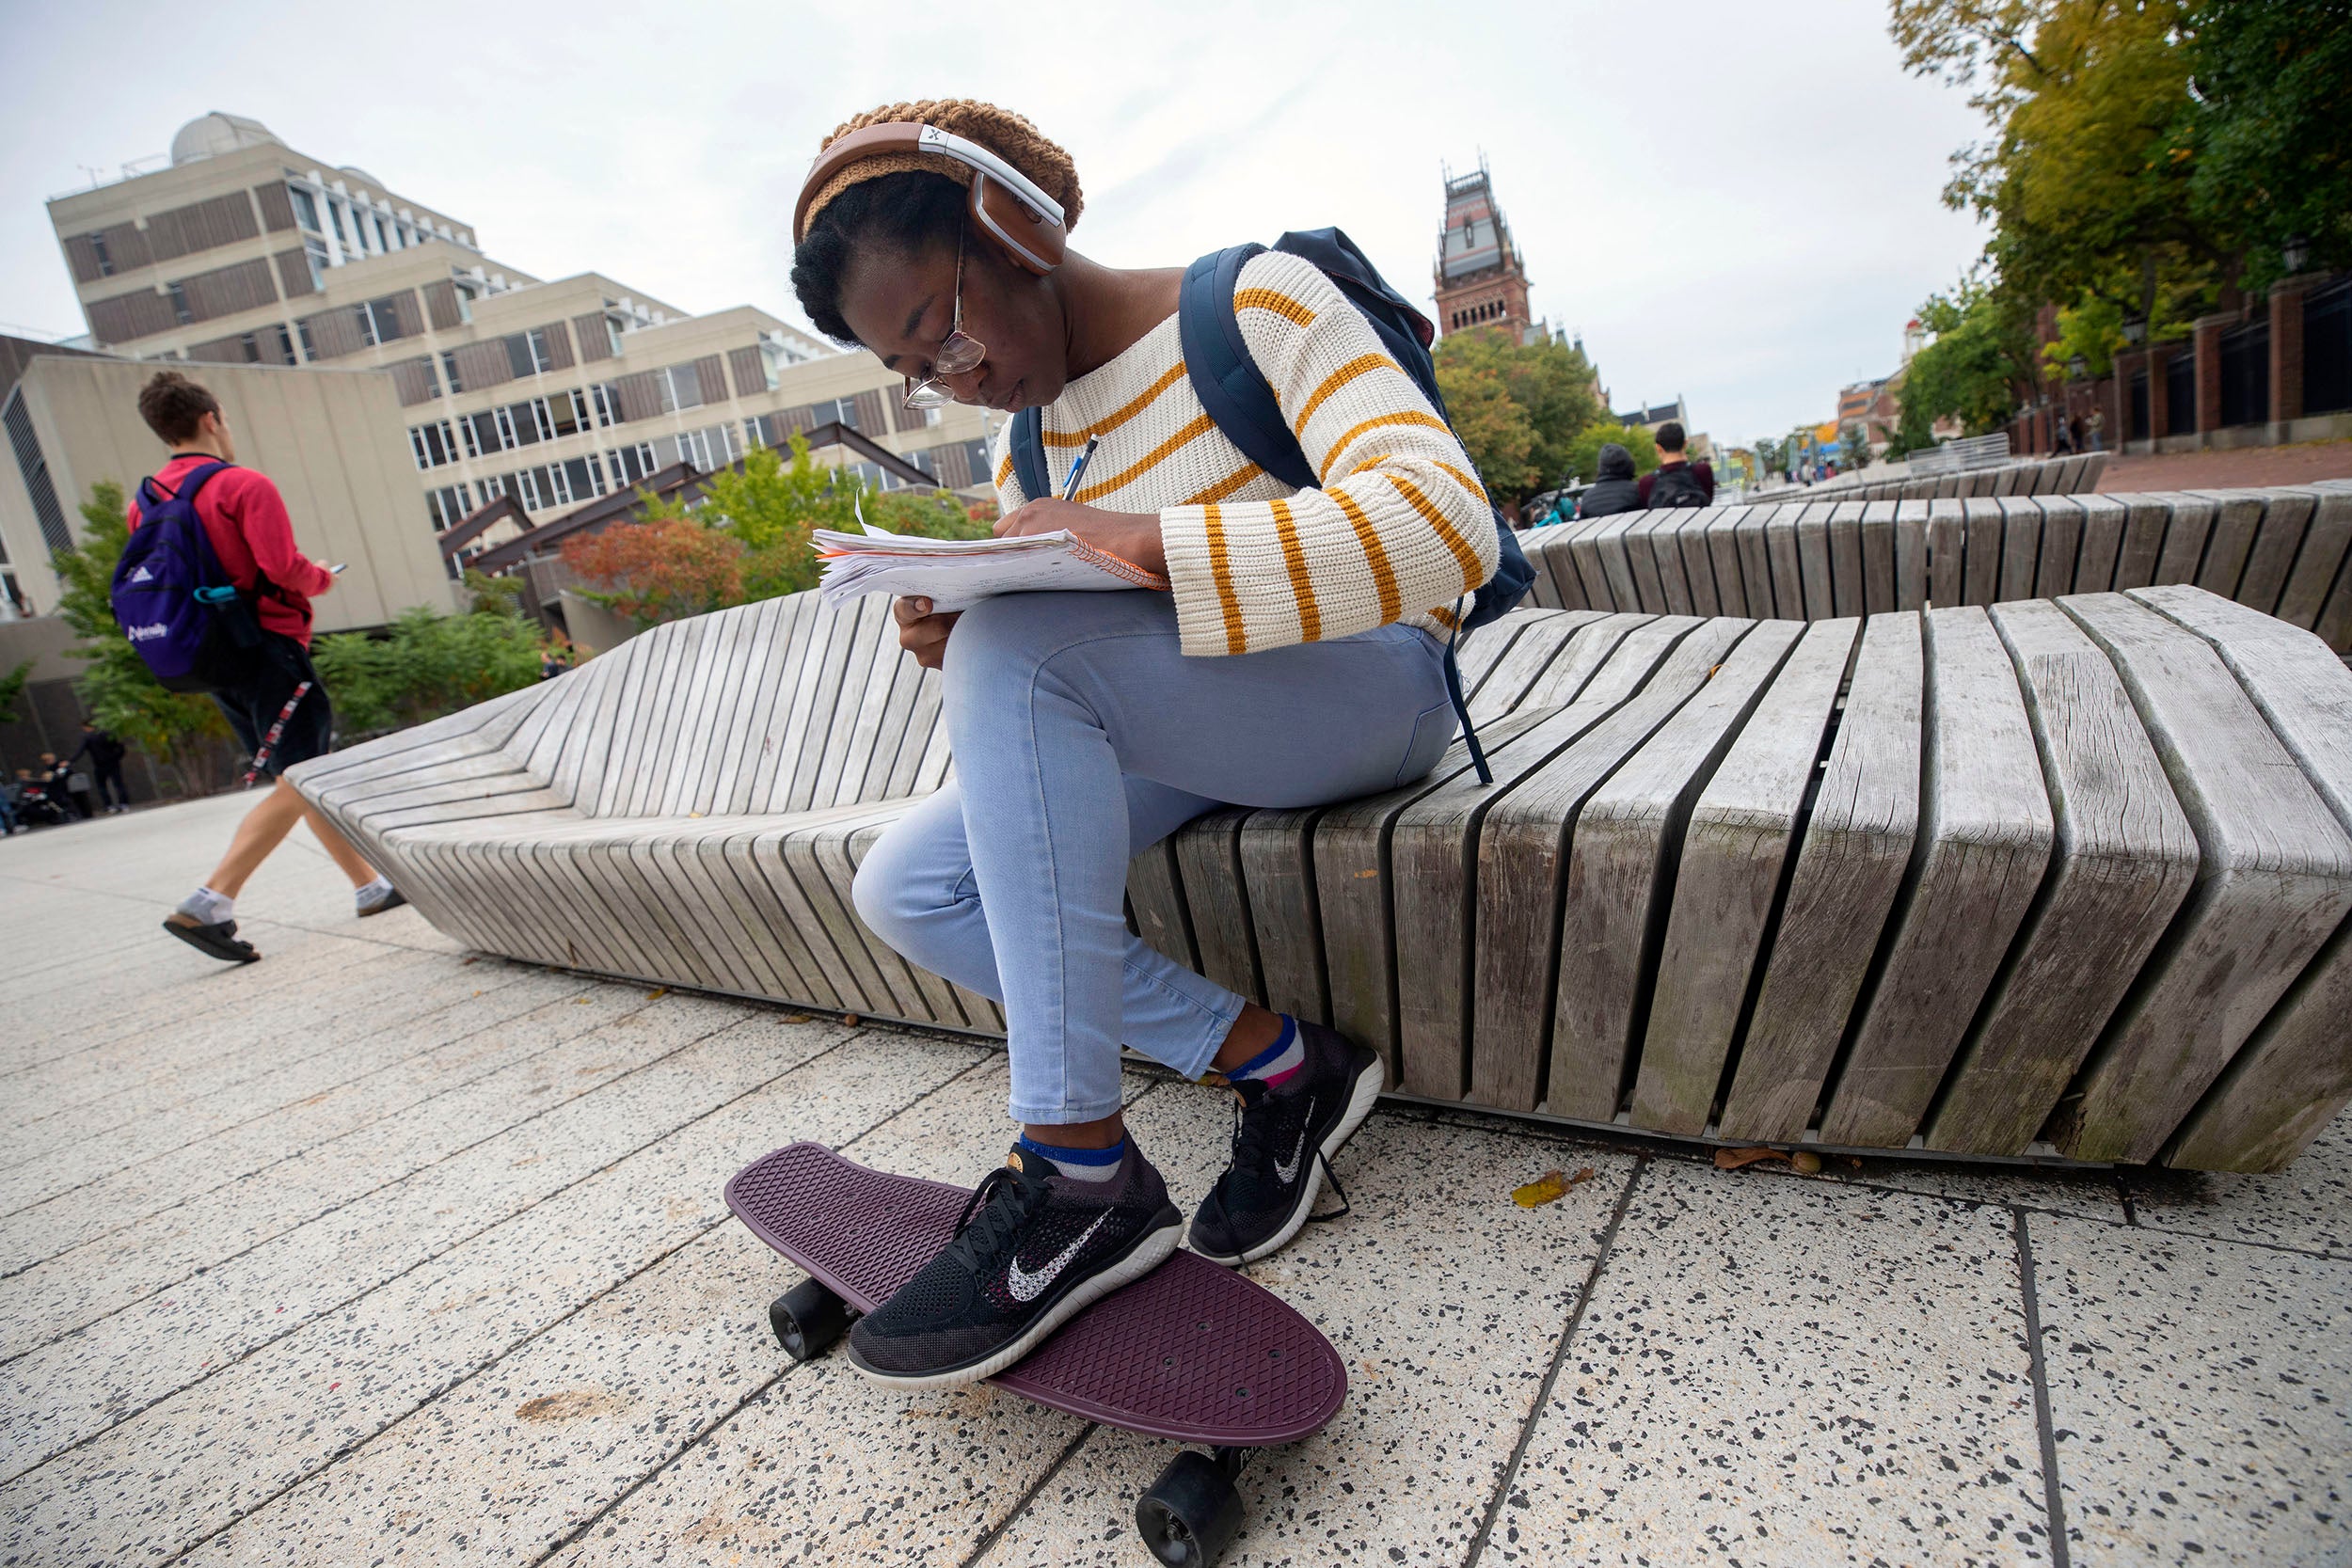 Edith “Tomi” Siyanbade does homework at the Science Center Plaza, resting her foot on a skateboard that she uses for transportation.